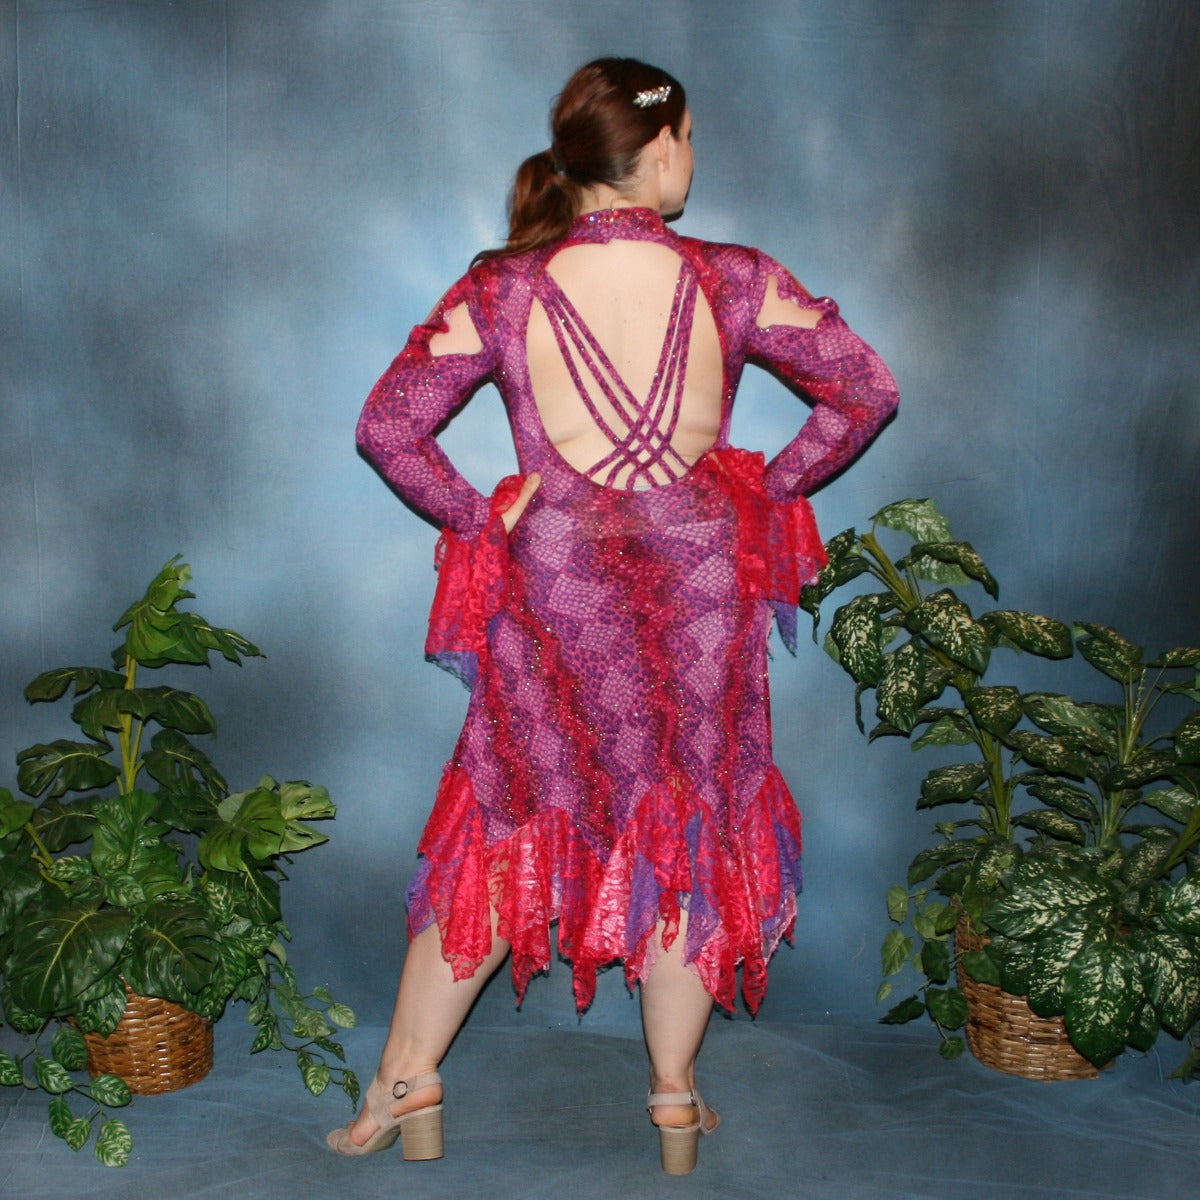 Crystal's Creations back view of Red & purple Latin/rhythm dress created in gorgeous printed slinky glitterknit in reptilia print of reds, purples & orchids with nude illusion cutouts…oodles of lace flounces…embellished with siam & siam Ab Swarovski stonework.